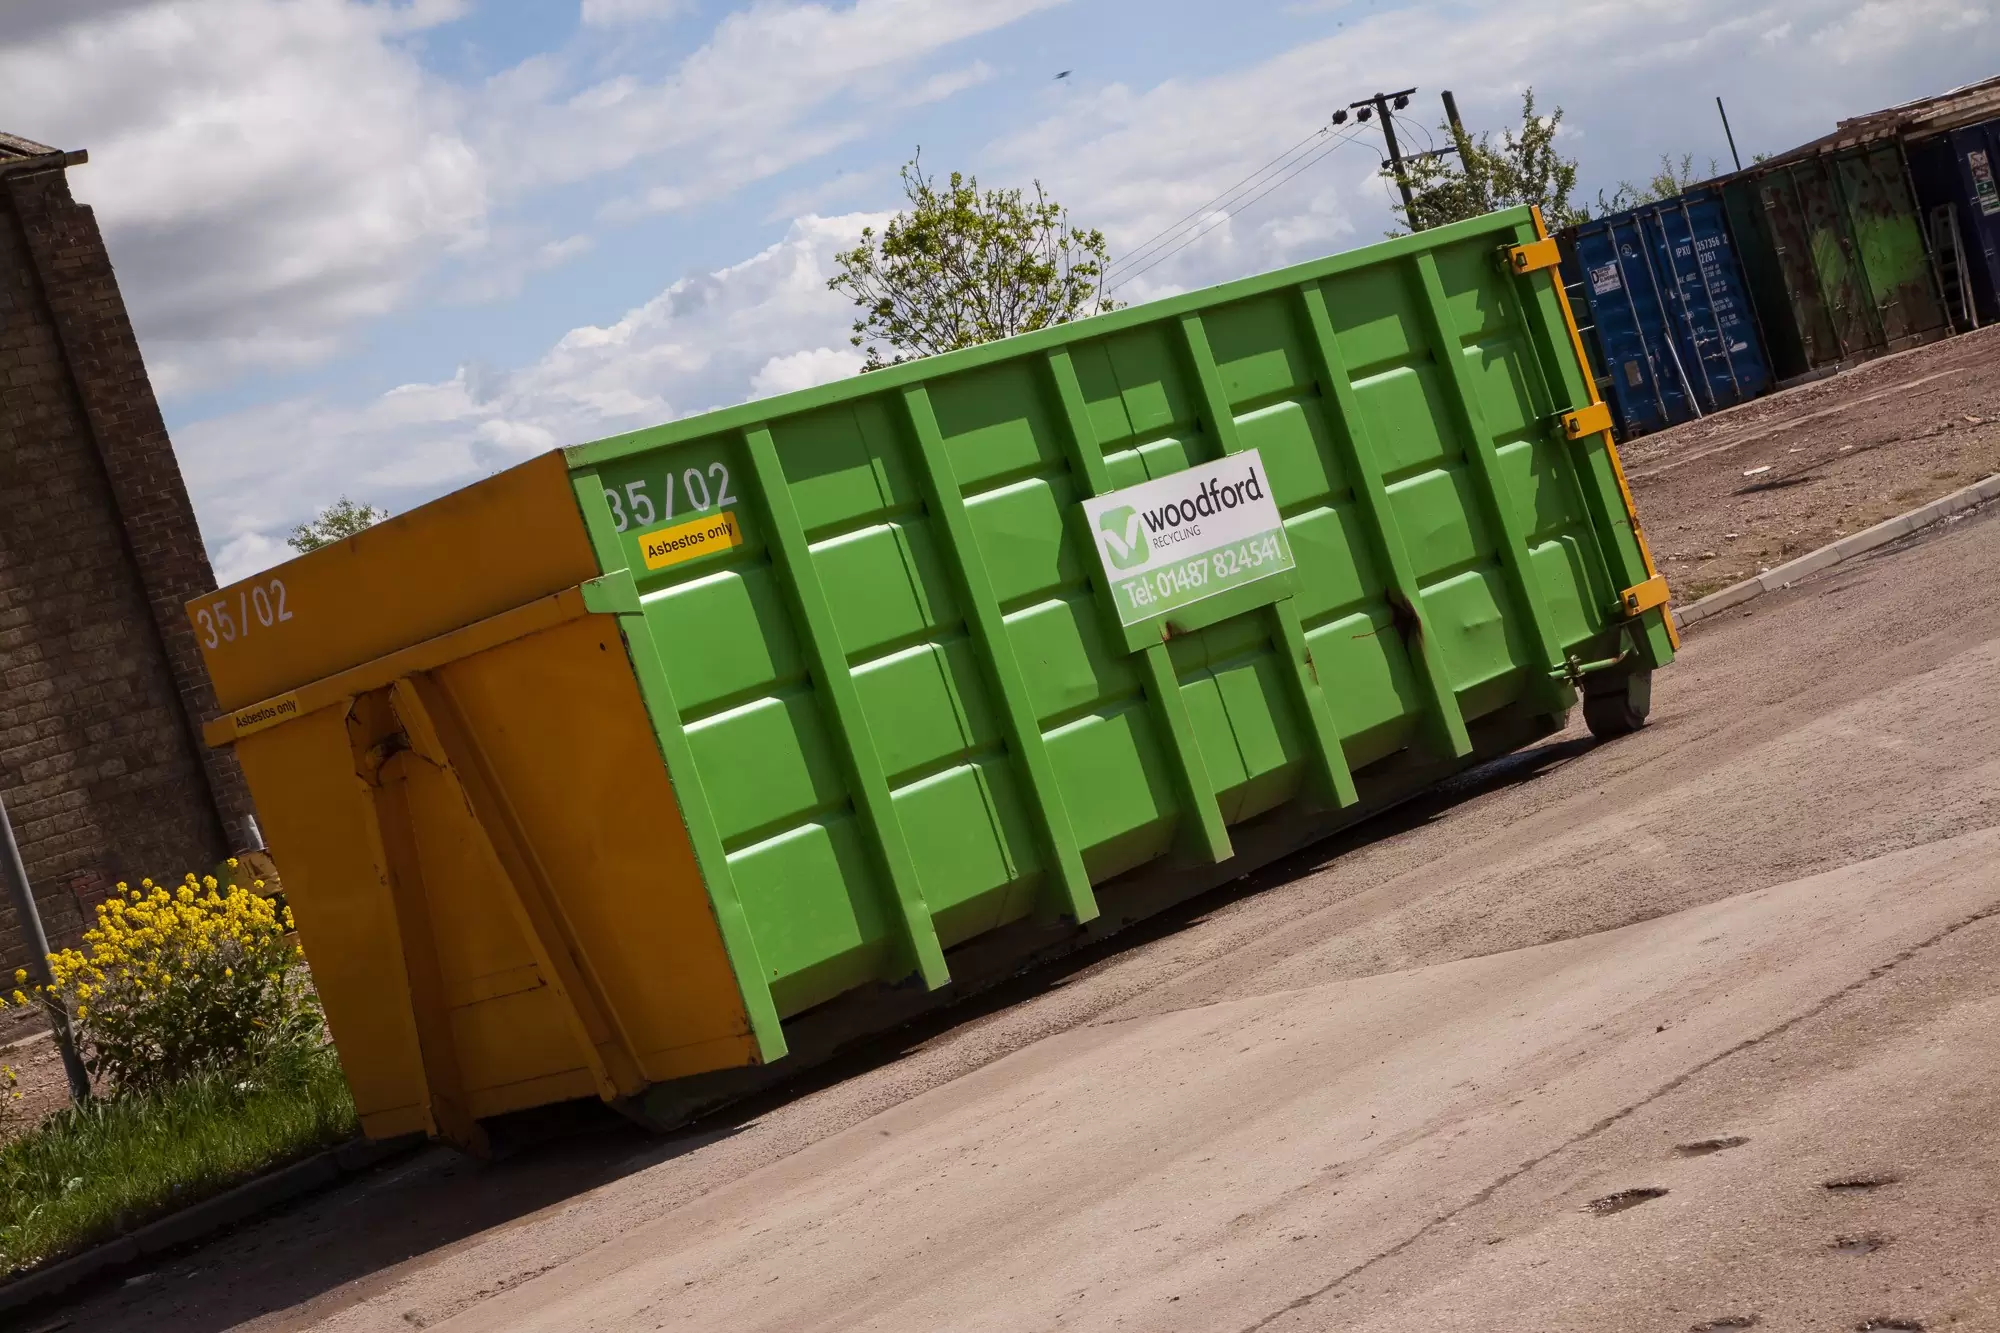 commercial skip hire in Cambridge, Peterborough and Huntingdon - Woodford Recycling